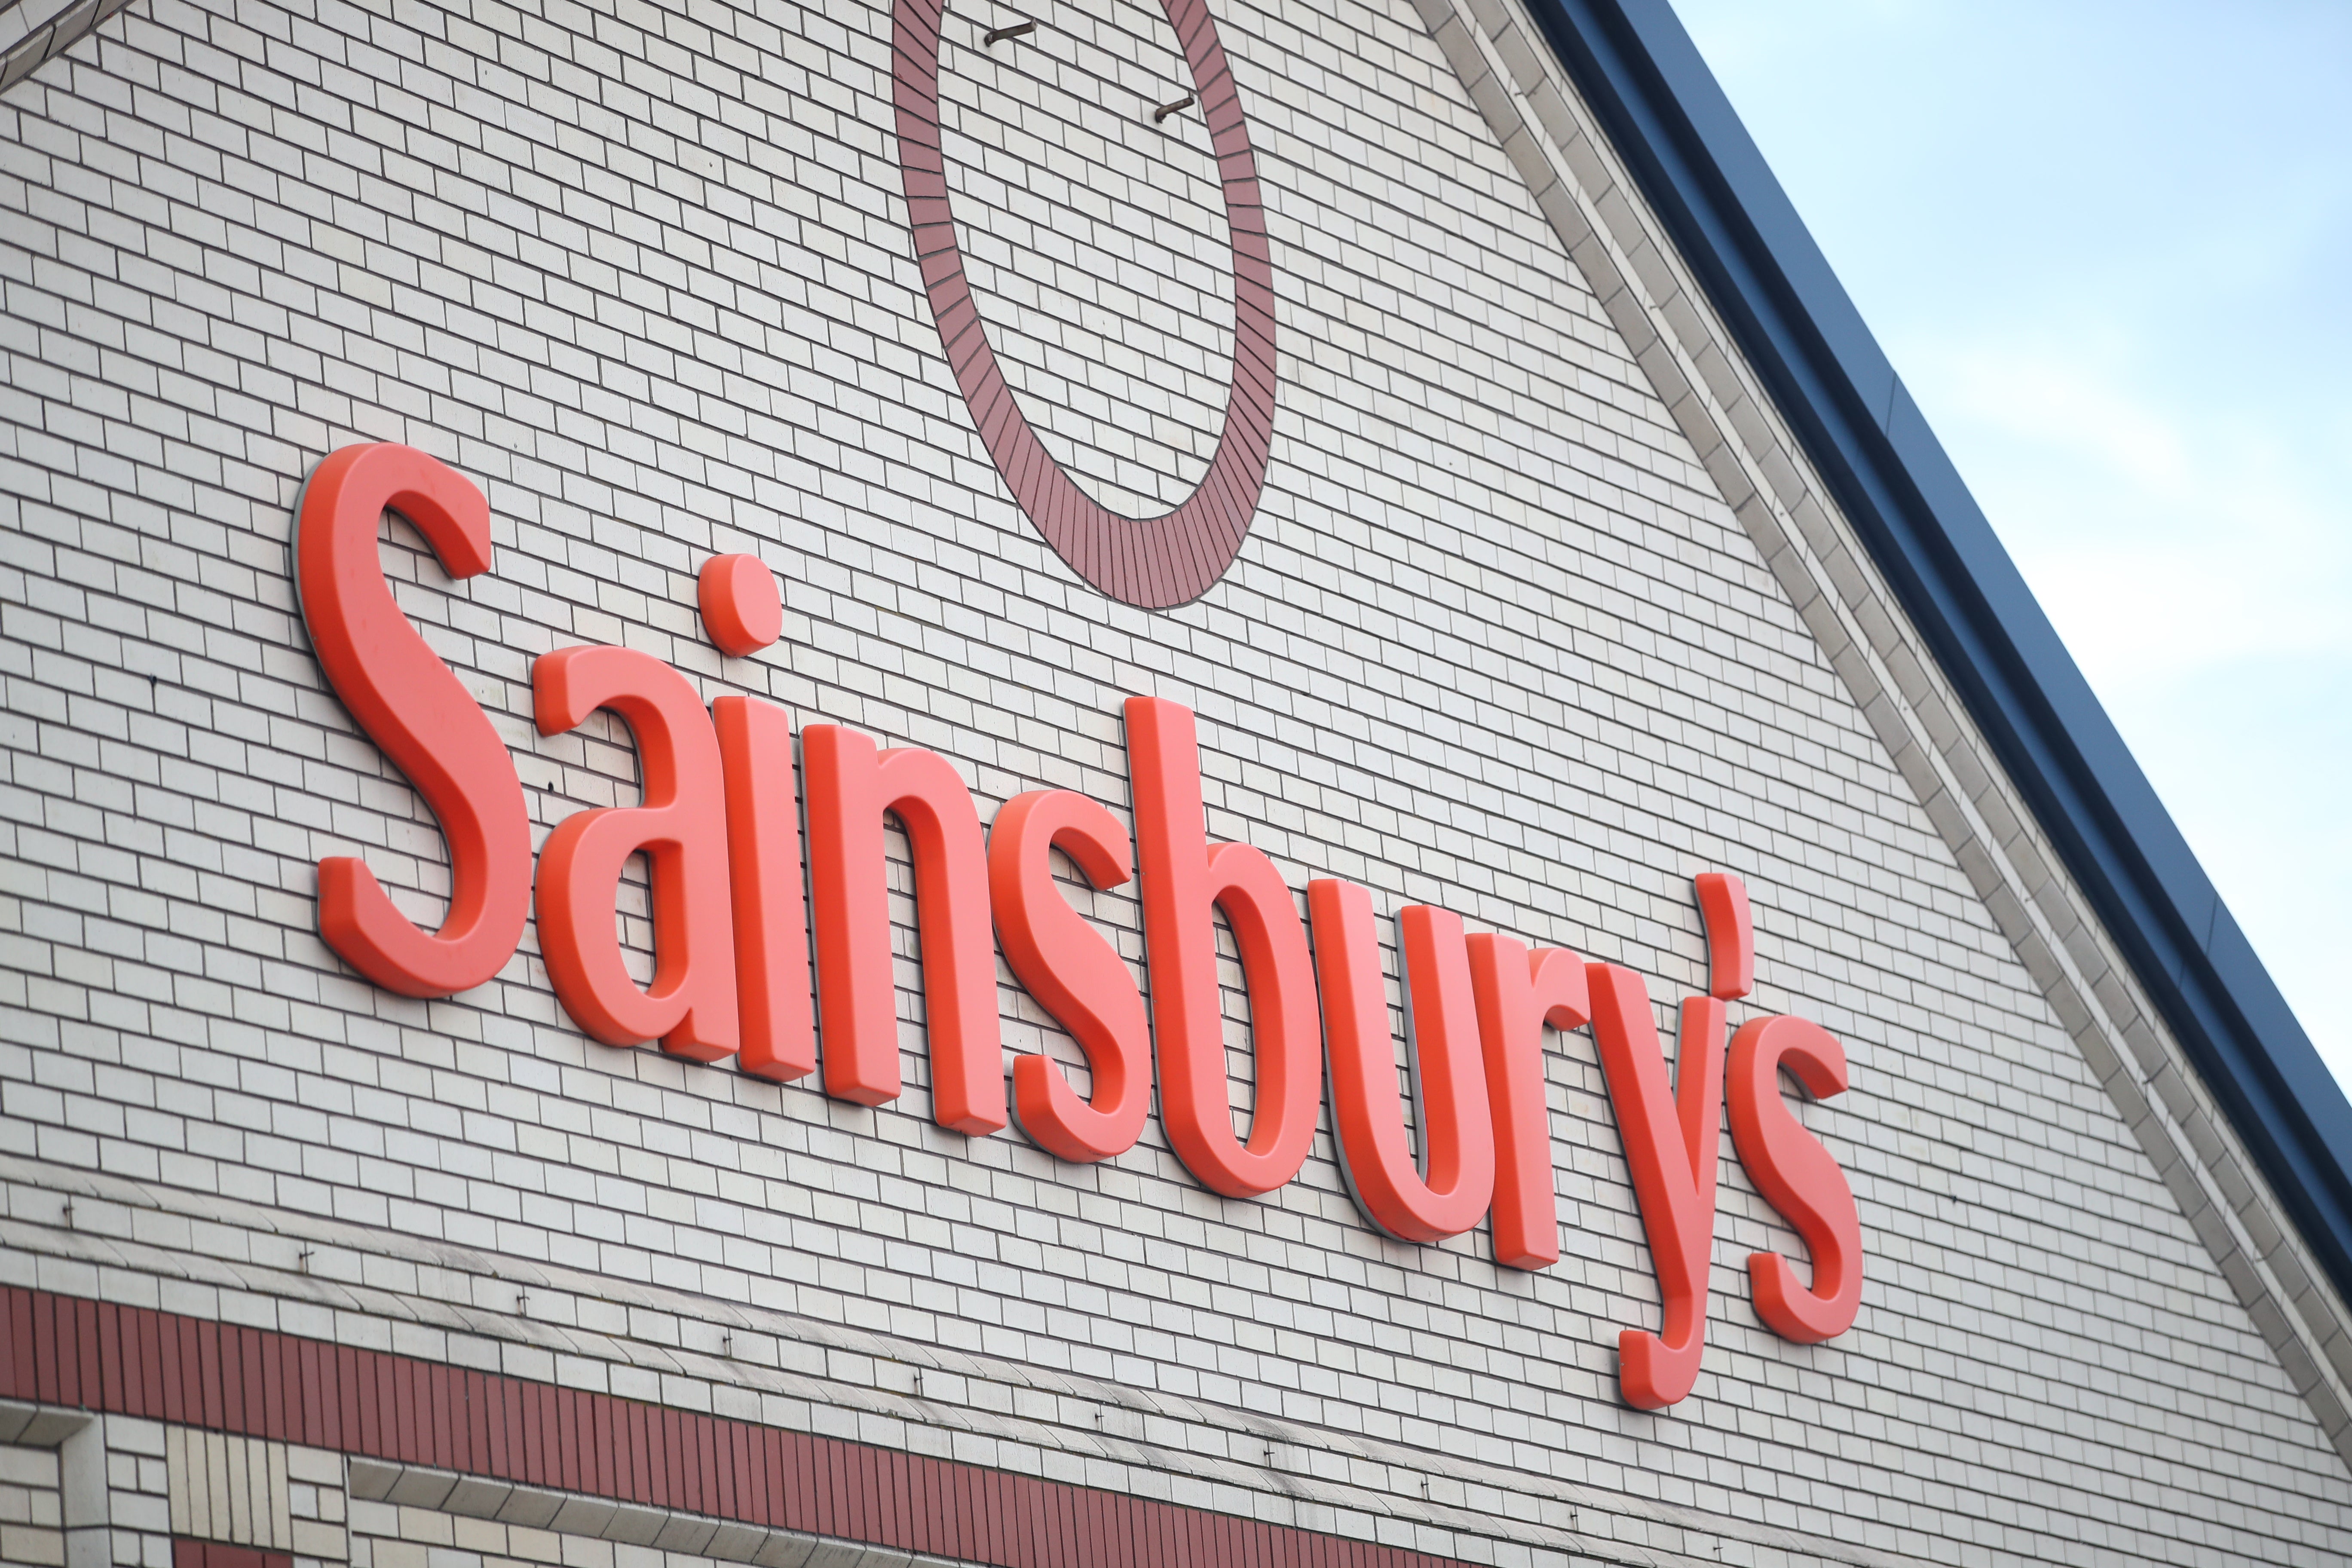 Sainsbury’s said it will switch all its stores to renewable energy by the end of the year (Danny Lawson/PA)